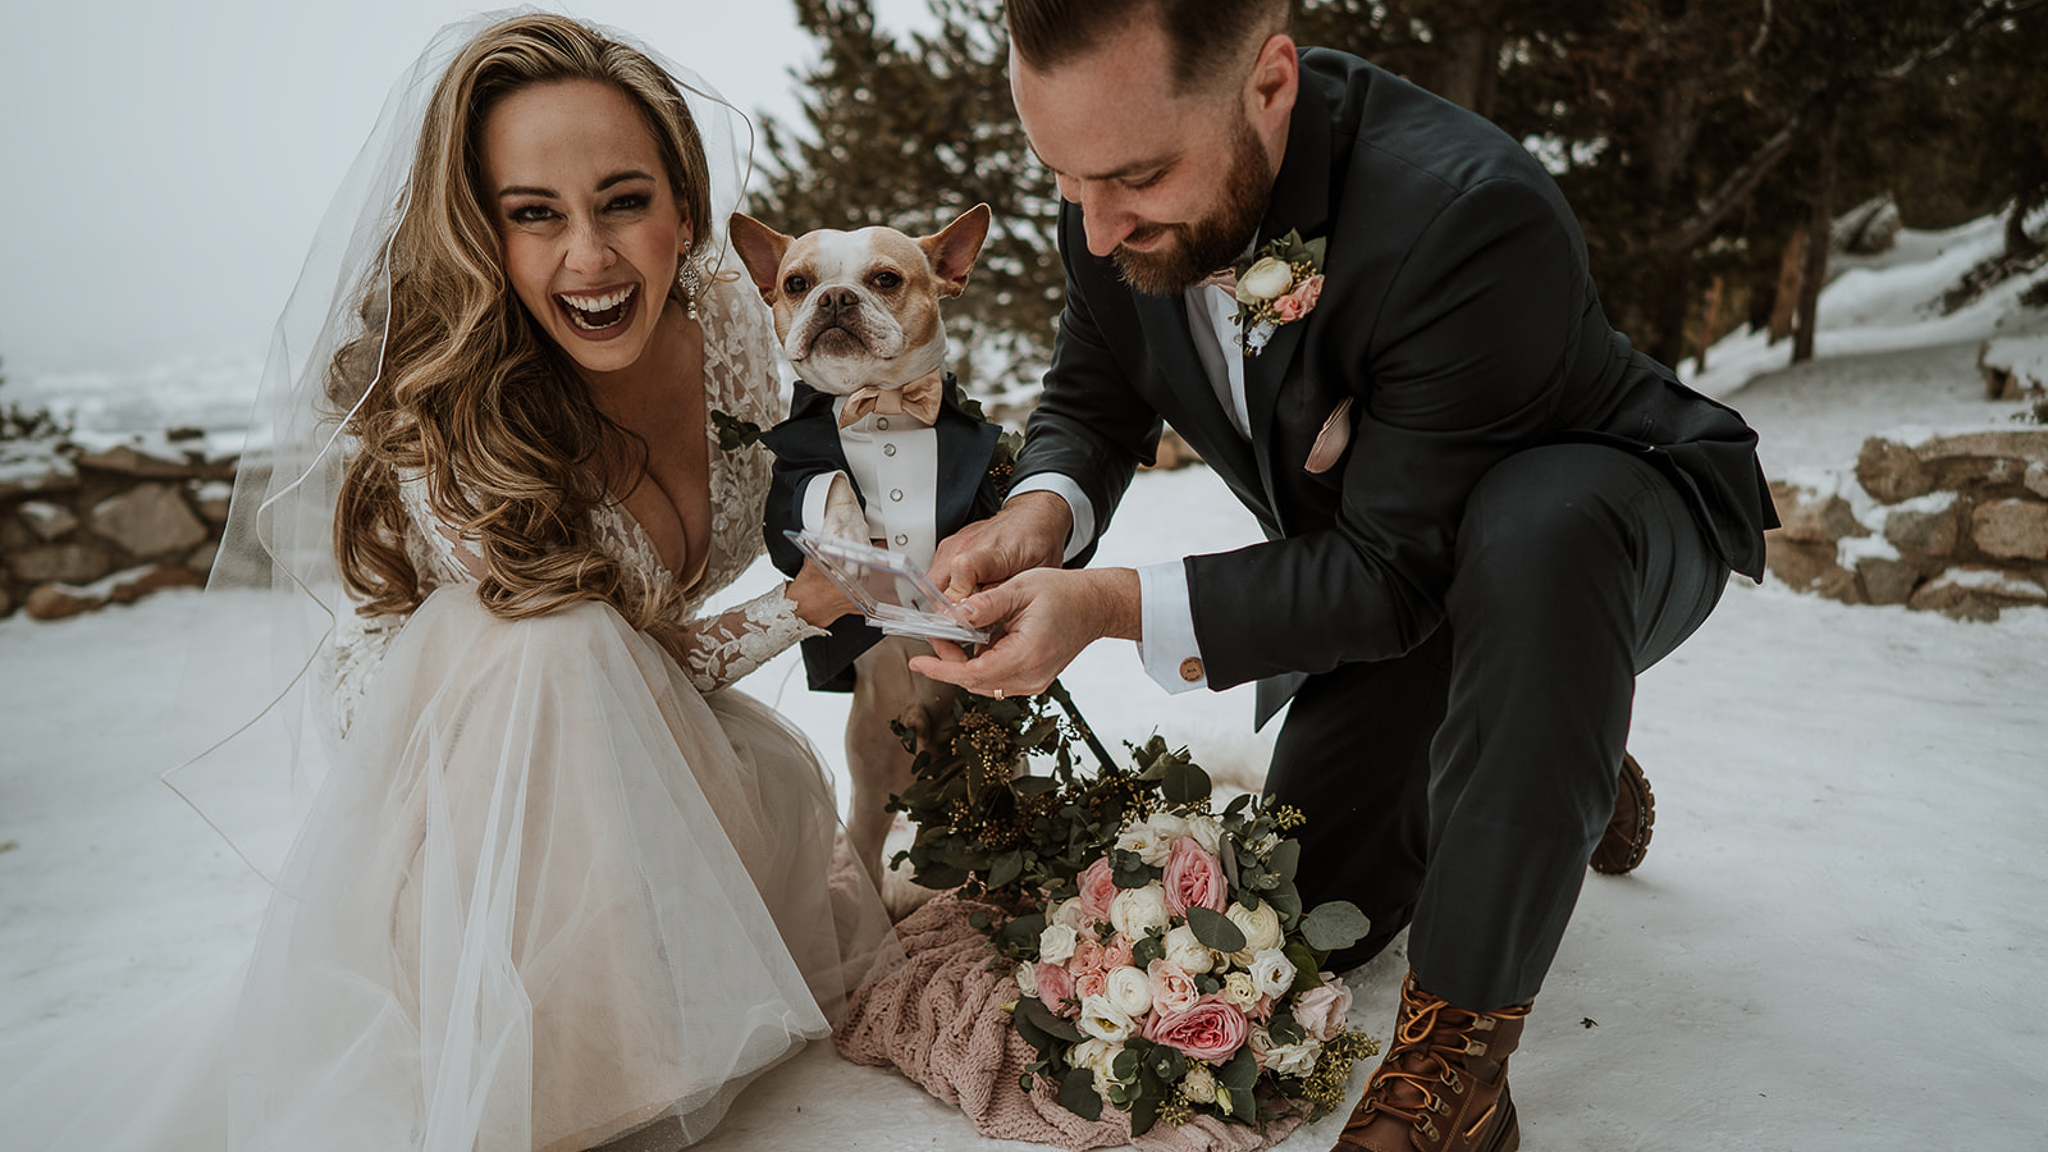 Angelina & Andy sign their marriage license with Bruno, their small dog, at their winter wedding at Sapphire Point in Breckenridge, CO.